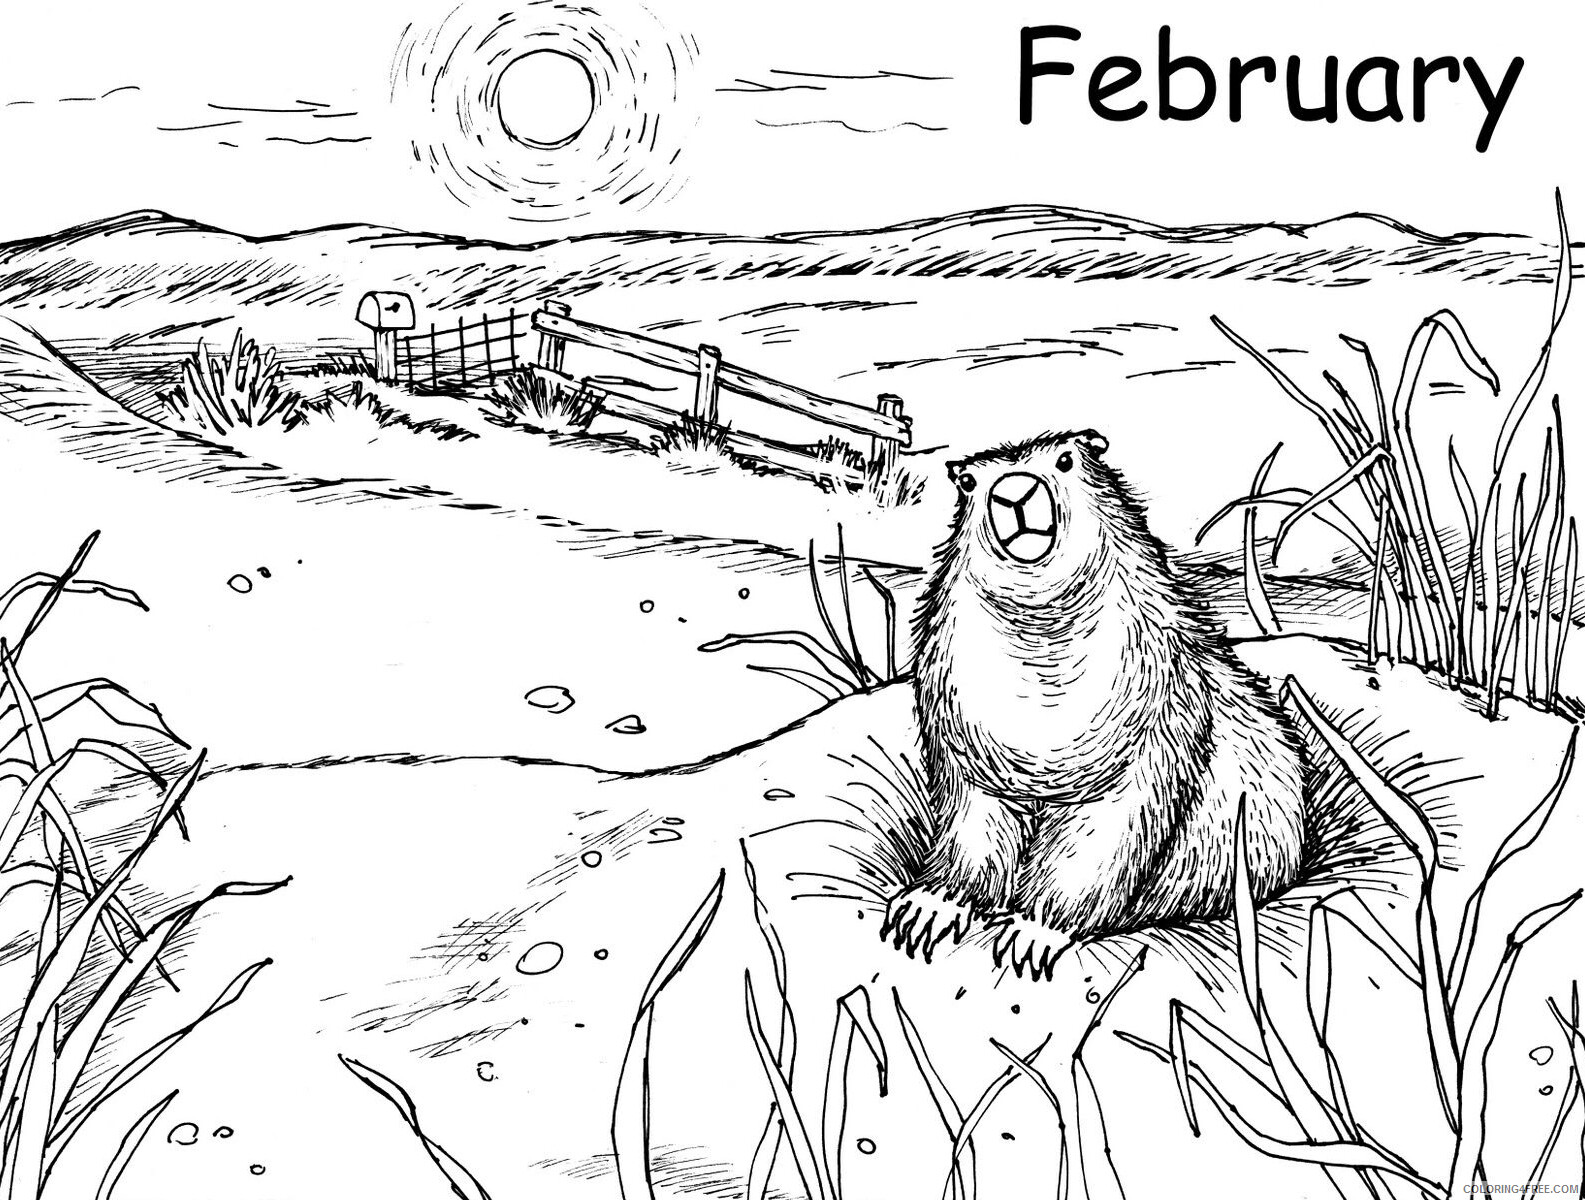 Groundhog Day Coloring Pages Holiday Groundhog Day February Printable 2021 0583 Coloring4free